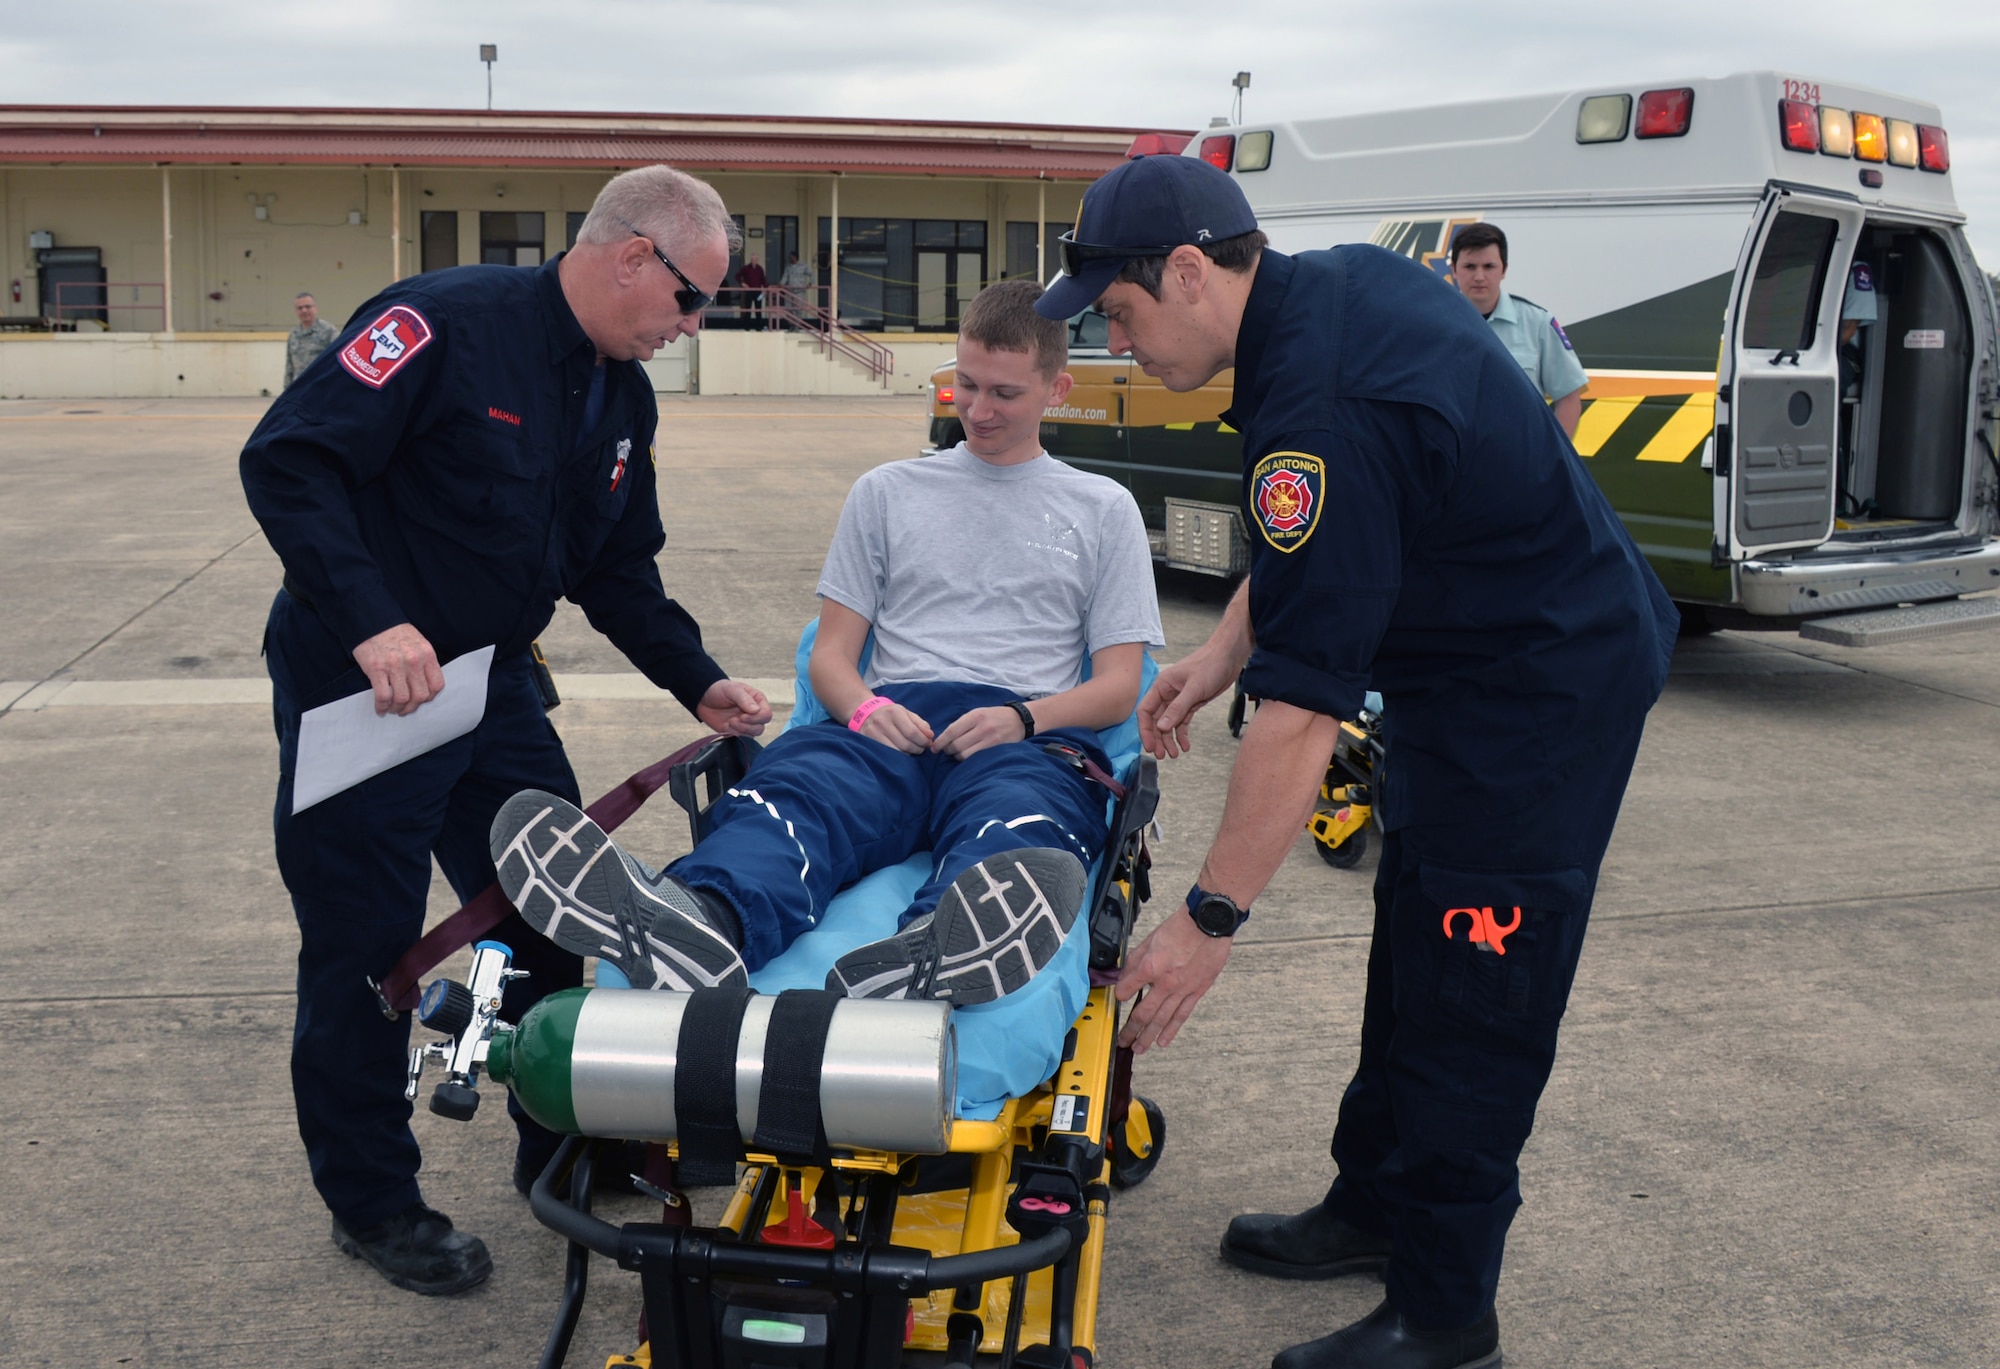 San Antonio paramedic firefighters, Richard Mahan and Dave McCulley, secure seatbelts on Airman Davis Schleifer, 344th Training Squadron, during a National Disaster Medical System exercise March 20, 2019 at Joint Base San Antonio-Lackland, Texas.